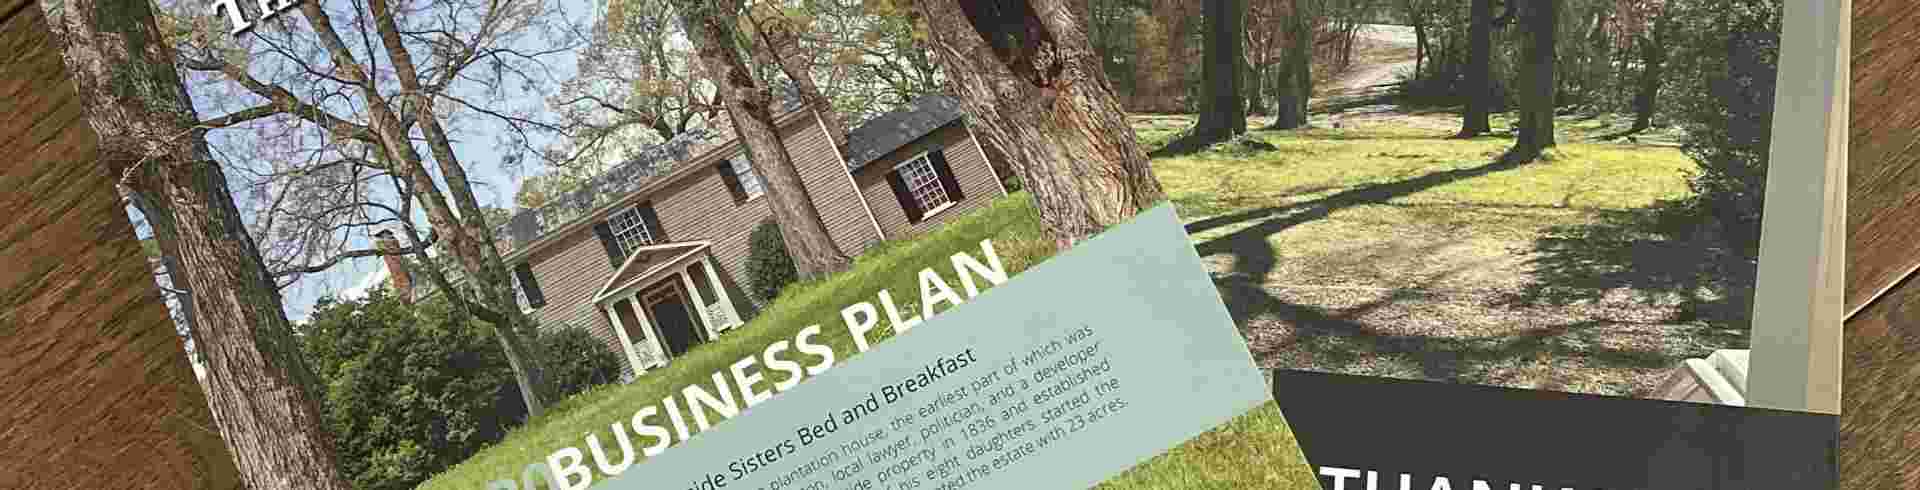 The Sunnyside Sisters Bed and Breakfast / Clarksville VA / Printed businessplan